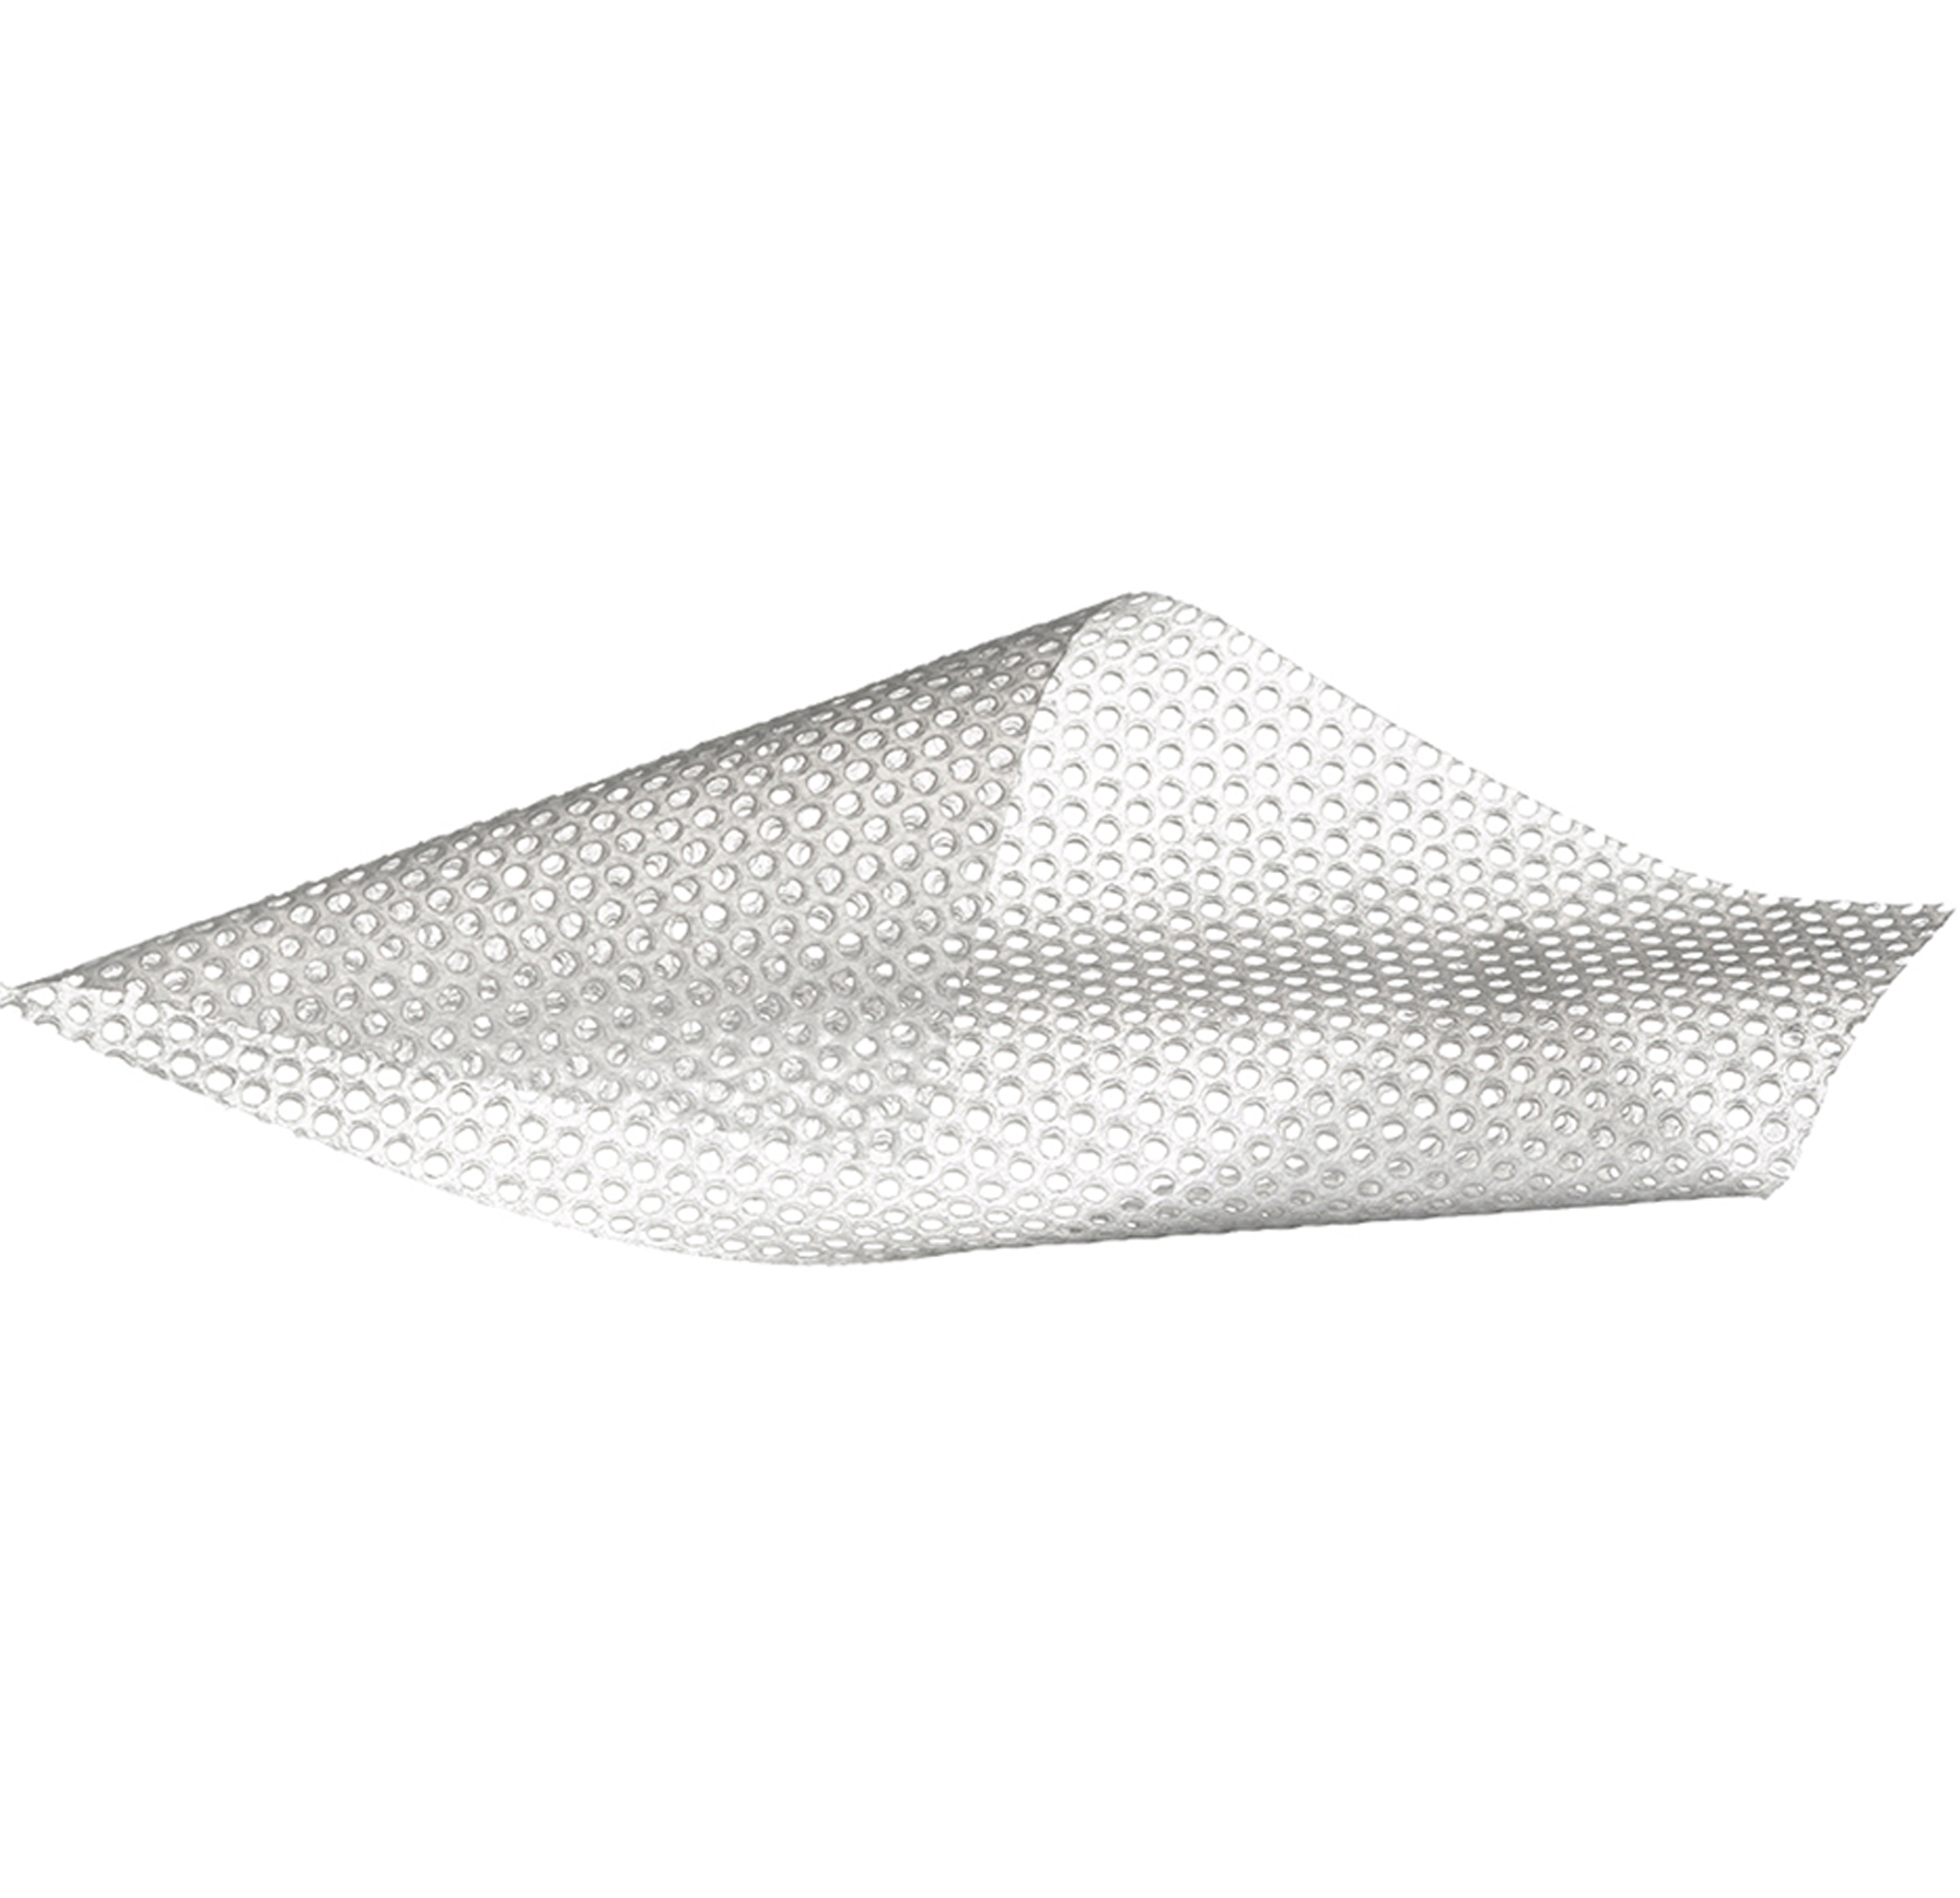 Wound Protection Mesh